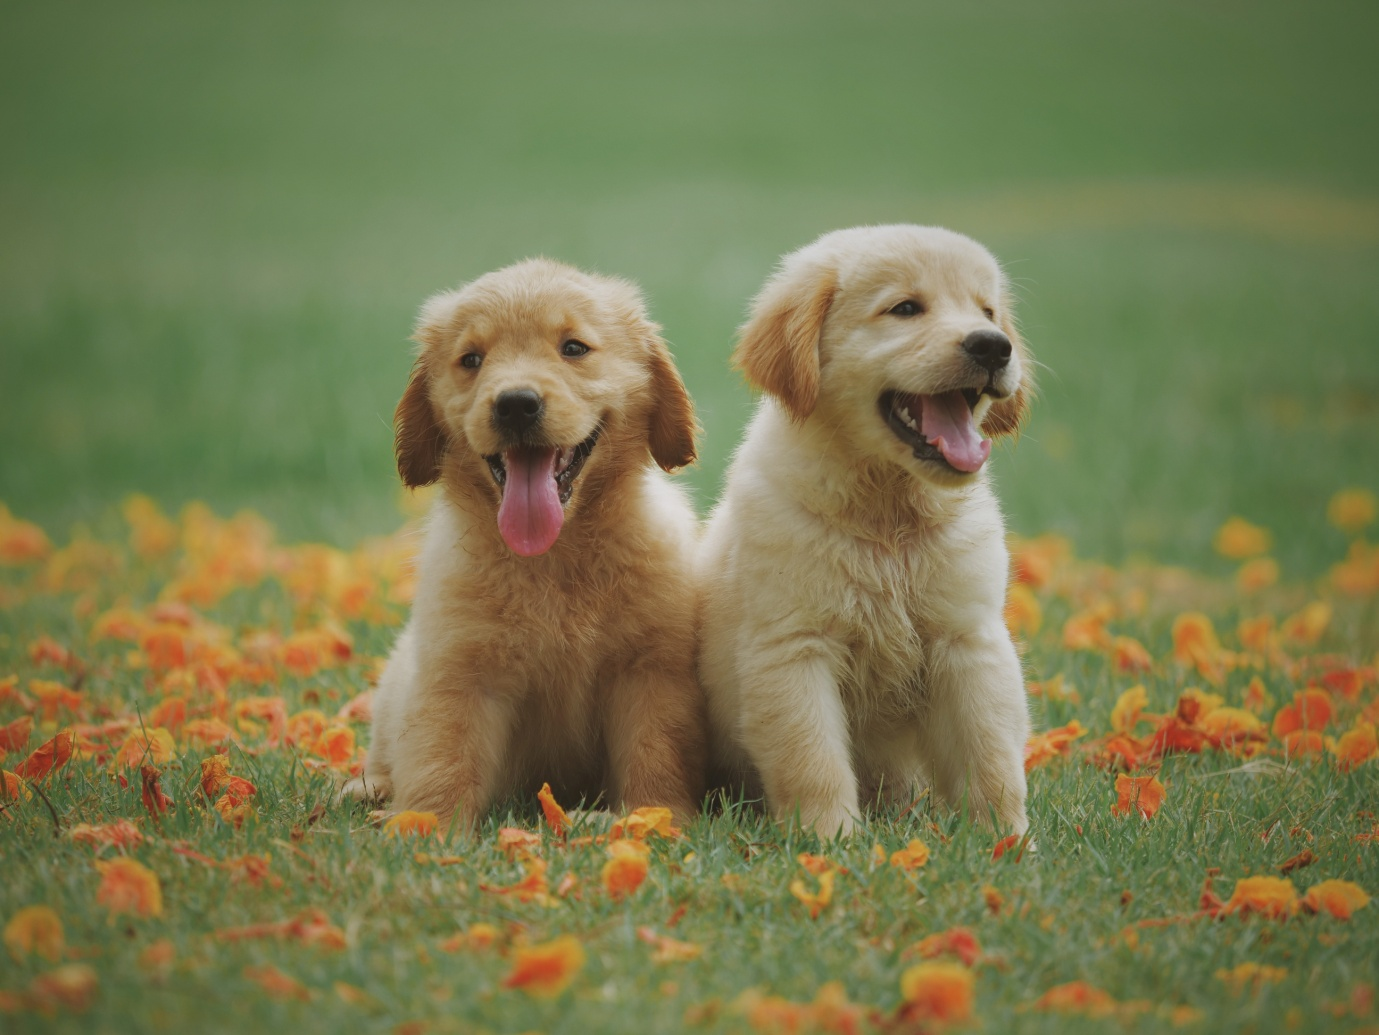 An image of two pups